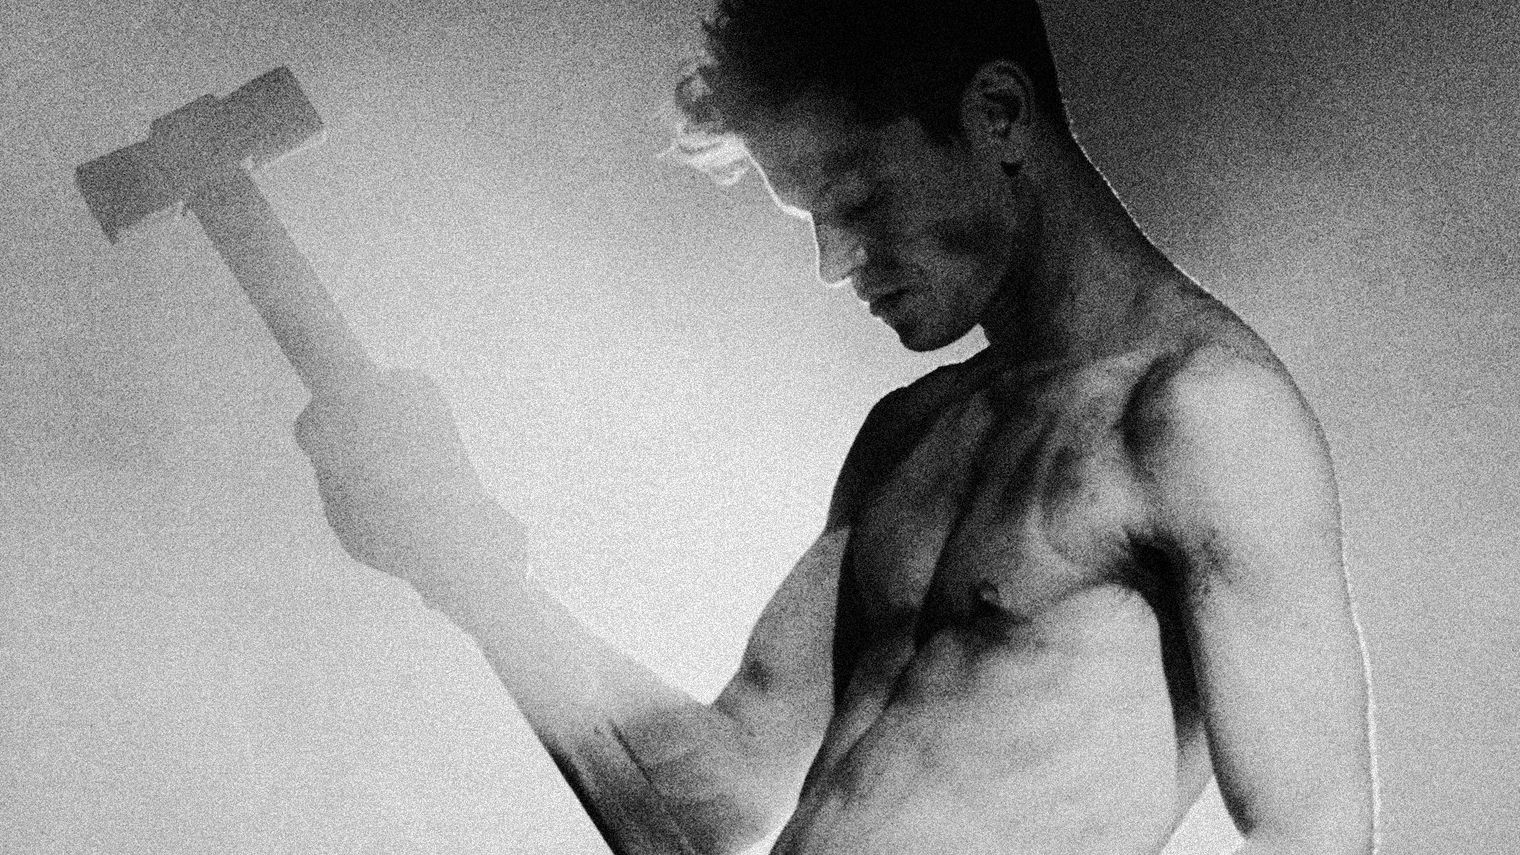 Greyscale image of a shirt-less Perfume Genius holding a sledgehammer in one hand, lifted to head height.